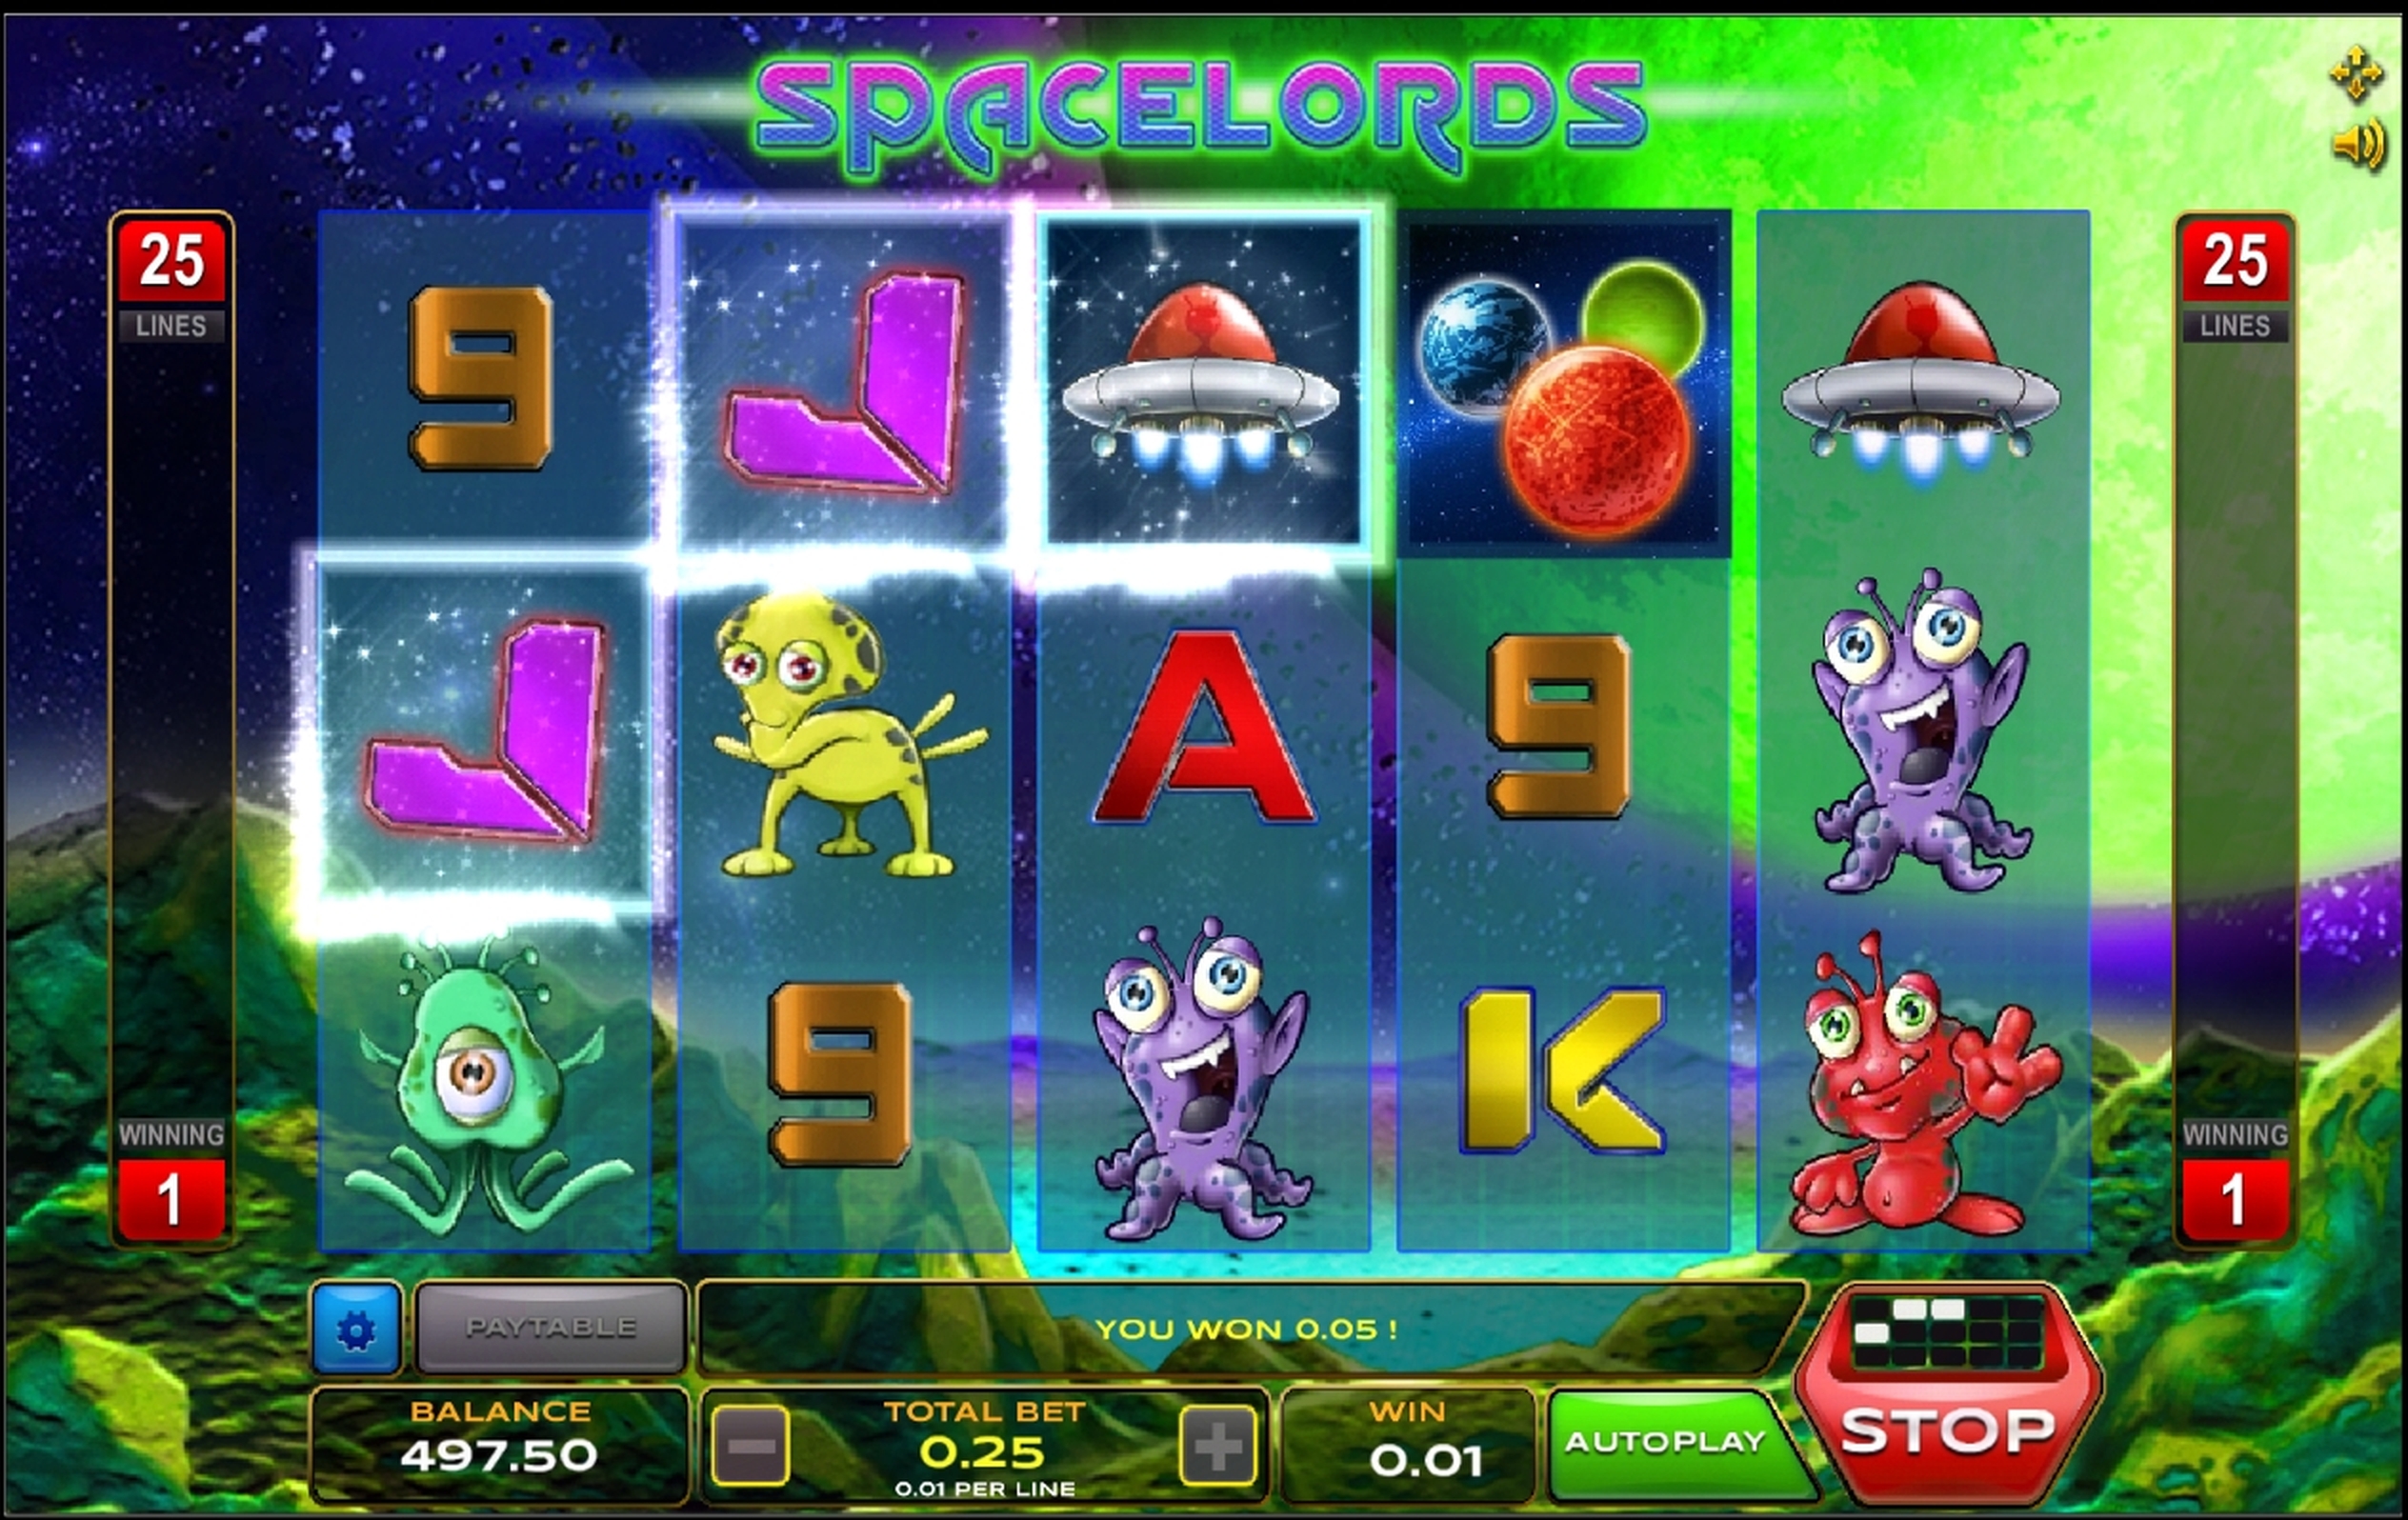 Win Money in Space Lords Free Slot Game by Xplosive Slots Group